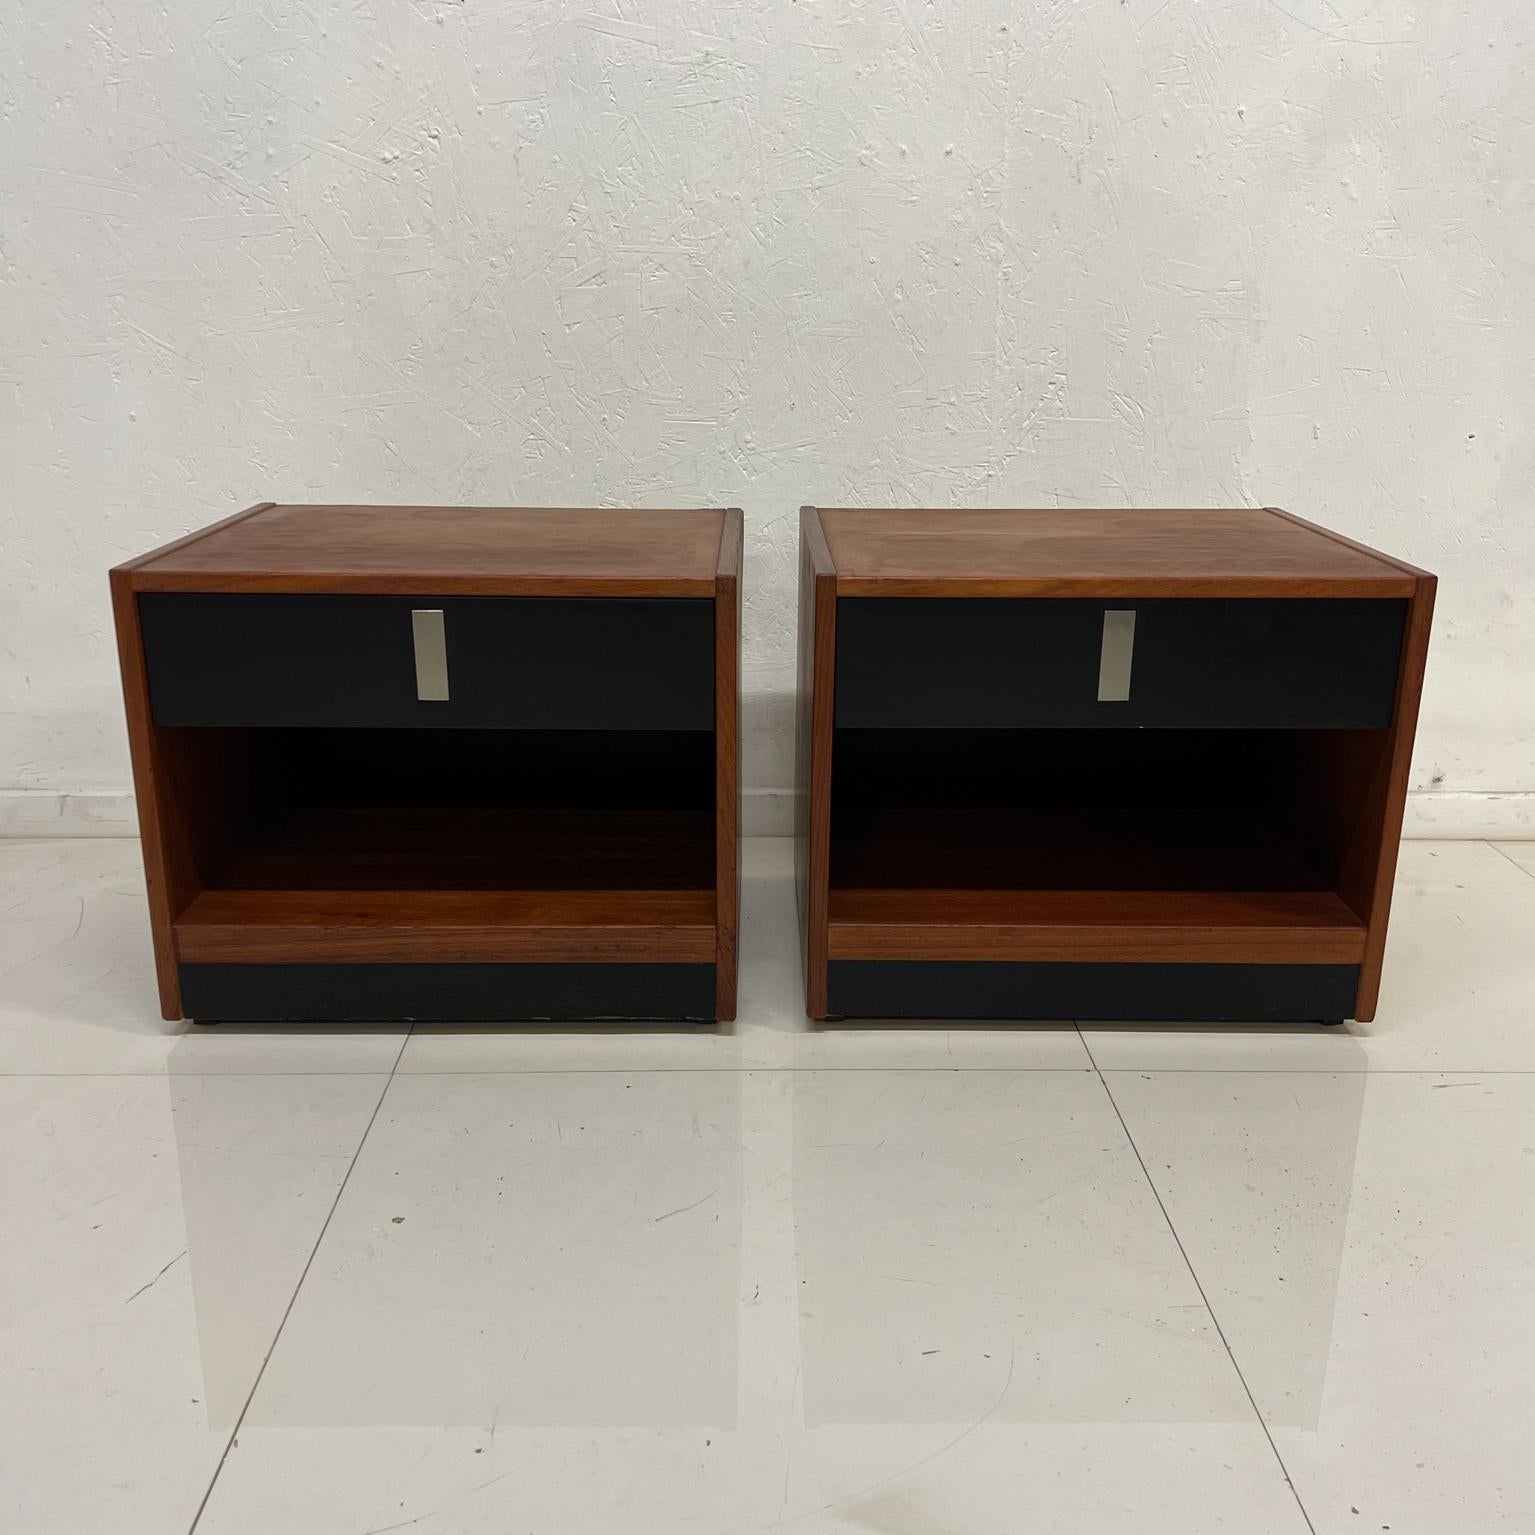 1970s from Canada Danish Mod teakwood nightstands modern cube pair
Stamped CANADA.
Solid structure, drawers function with ease.
Measures: 16.5 H x 20 W x 15.75 D drawer 17.25 W x 13.5 D x 3.25
Preowned original unrestored vintage condition.